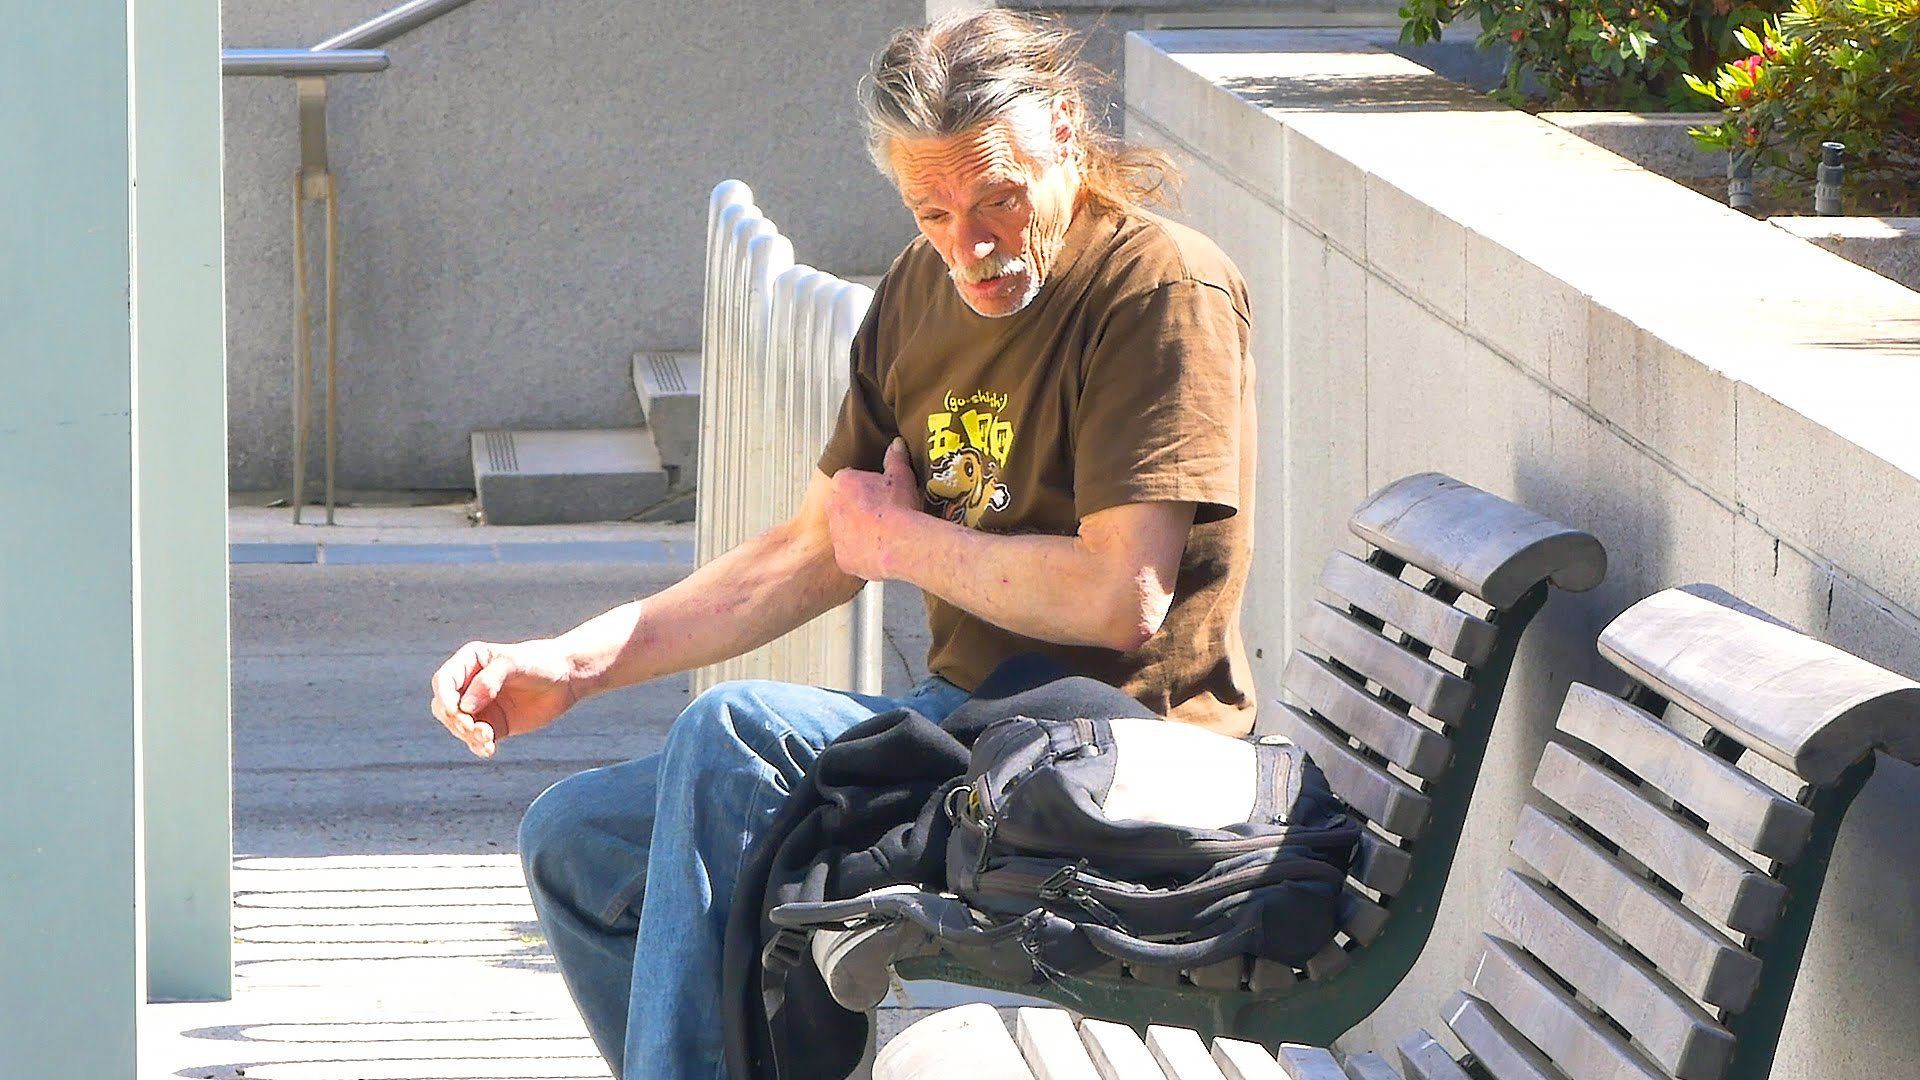 Homeless Man Is Given Money While He Sleeps, What He Does Next Is Super Touching